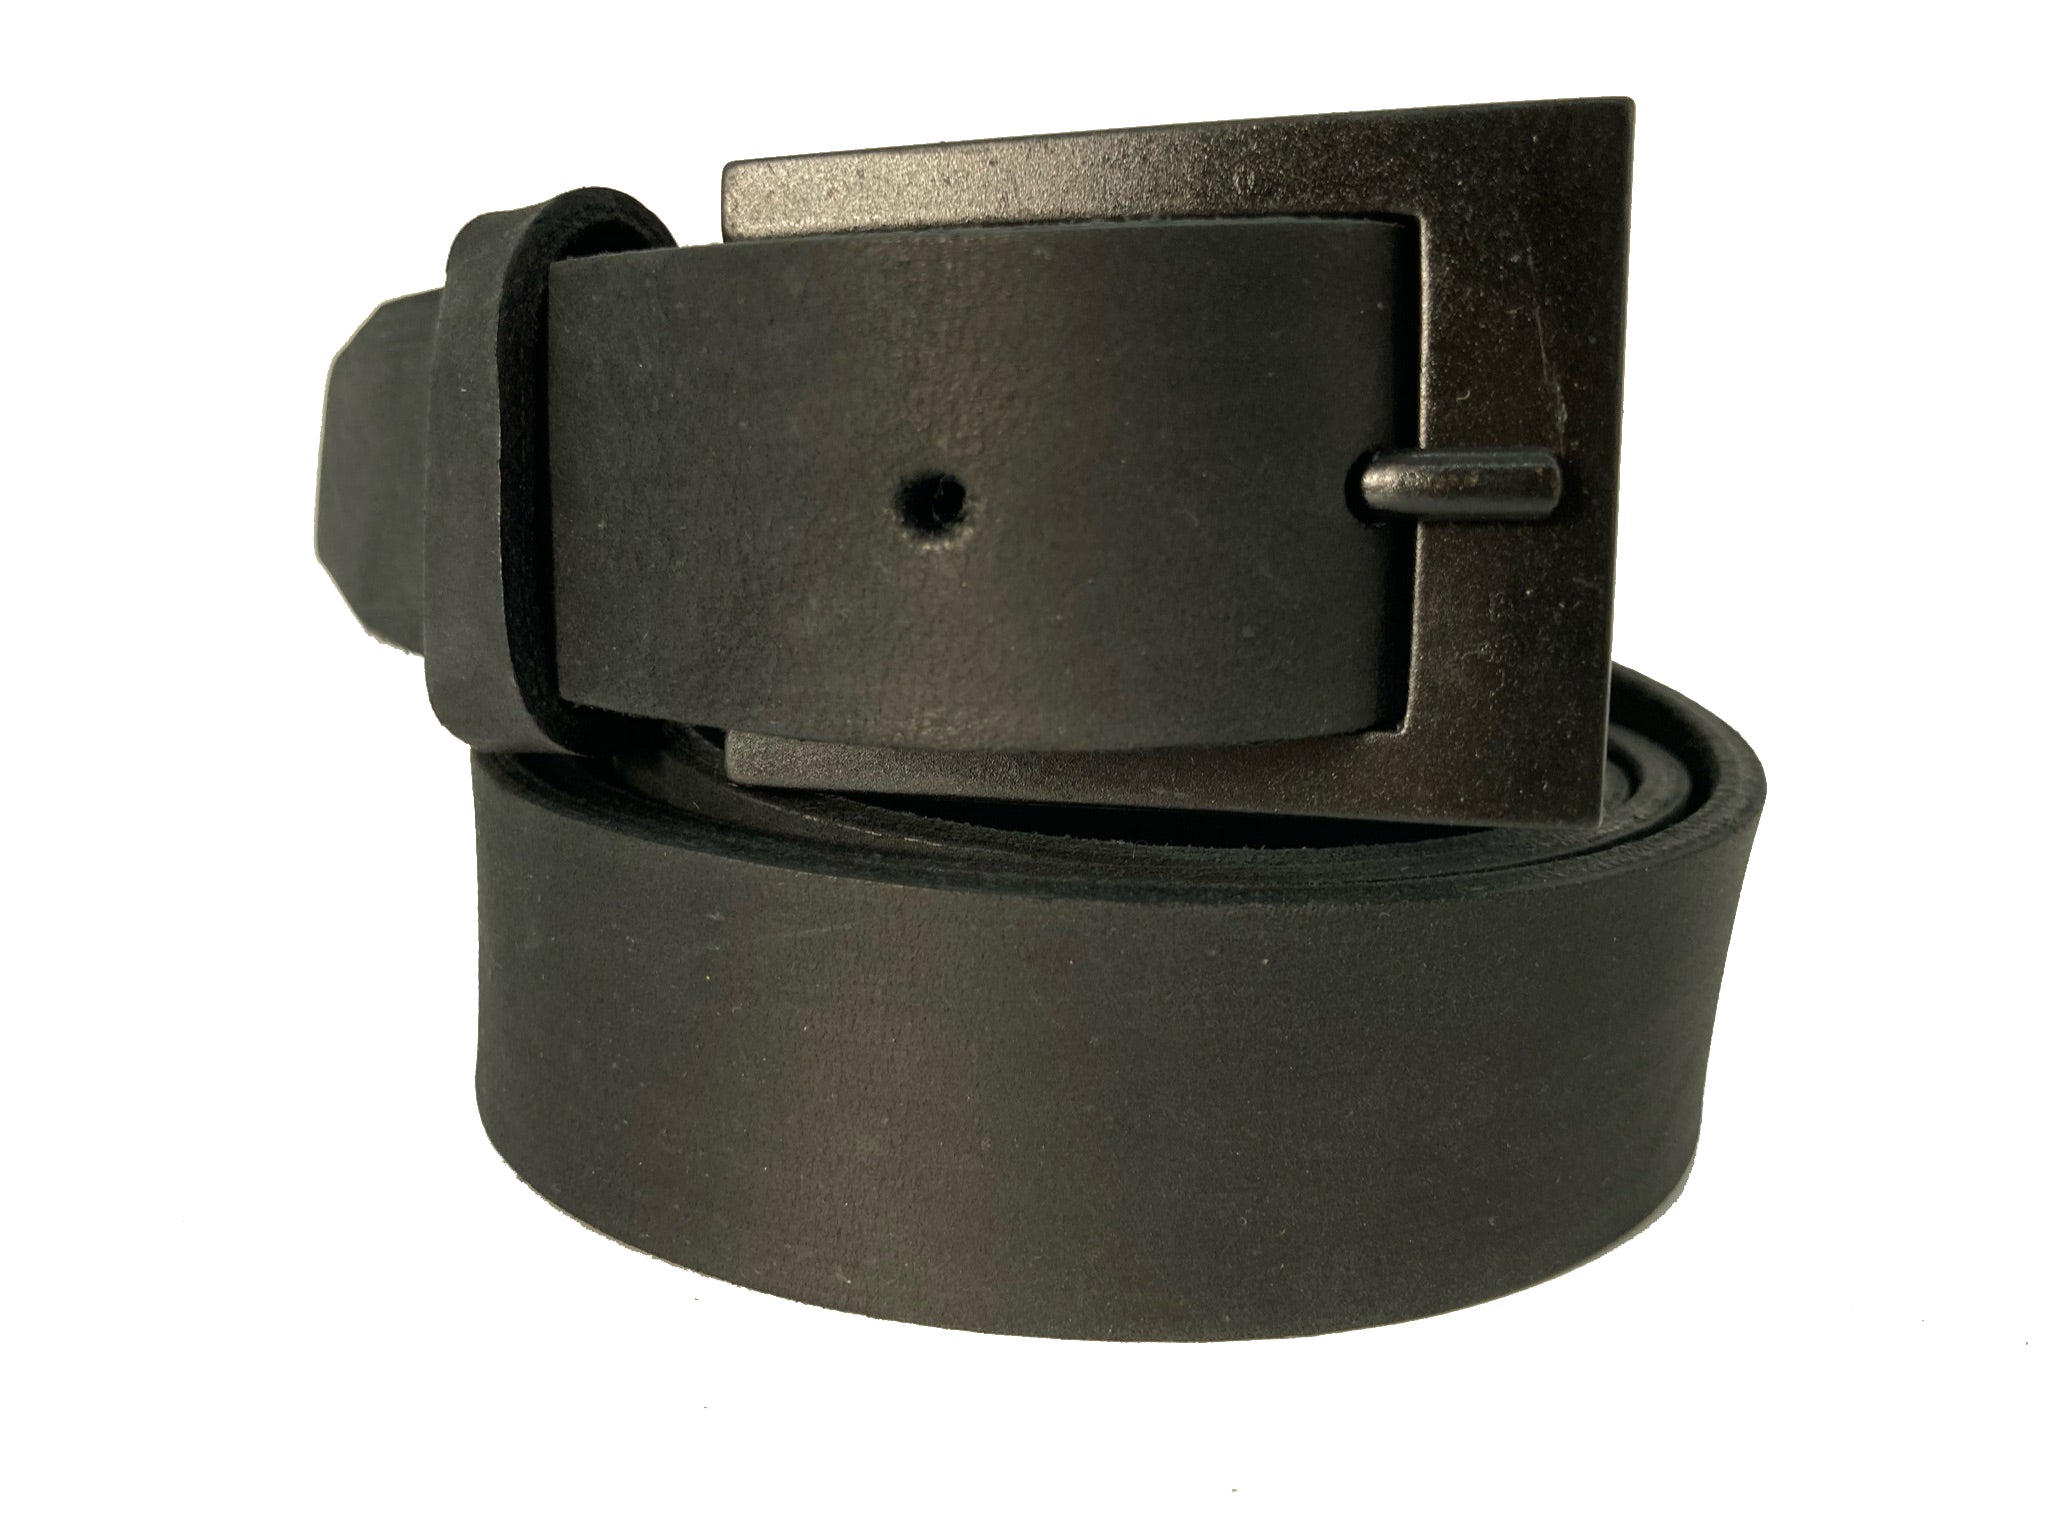 Handcrafted Suede Leather Belt - "UES Suede"